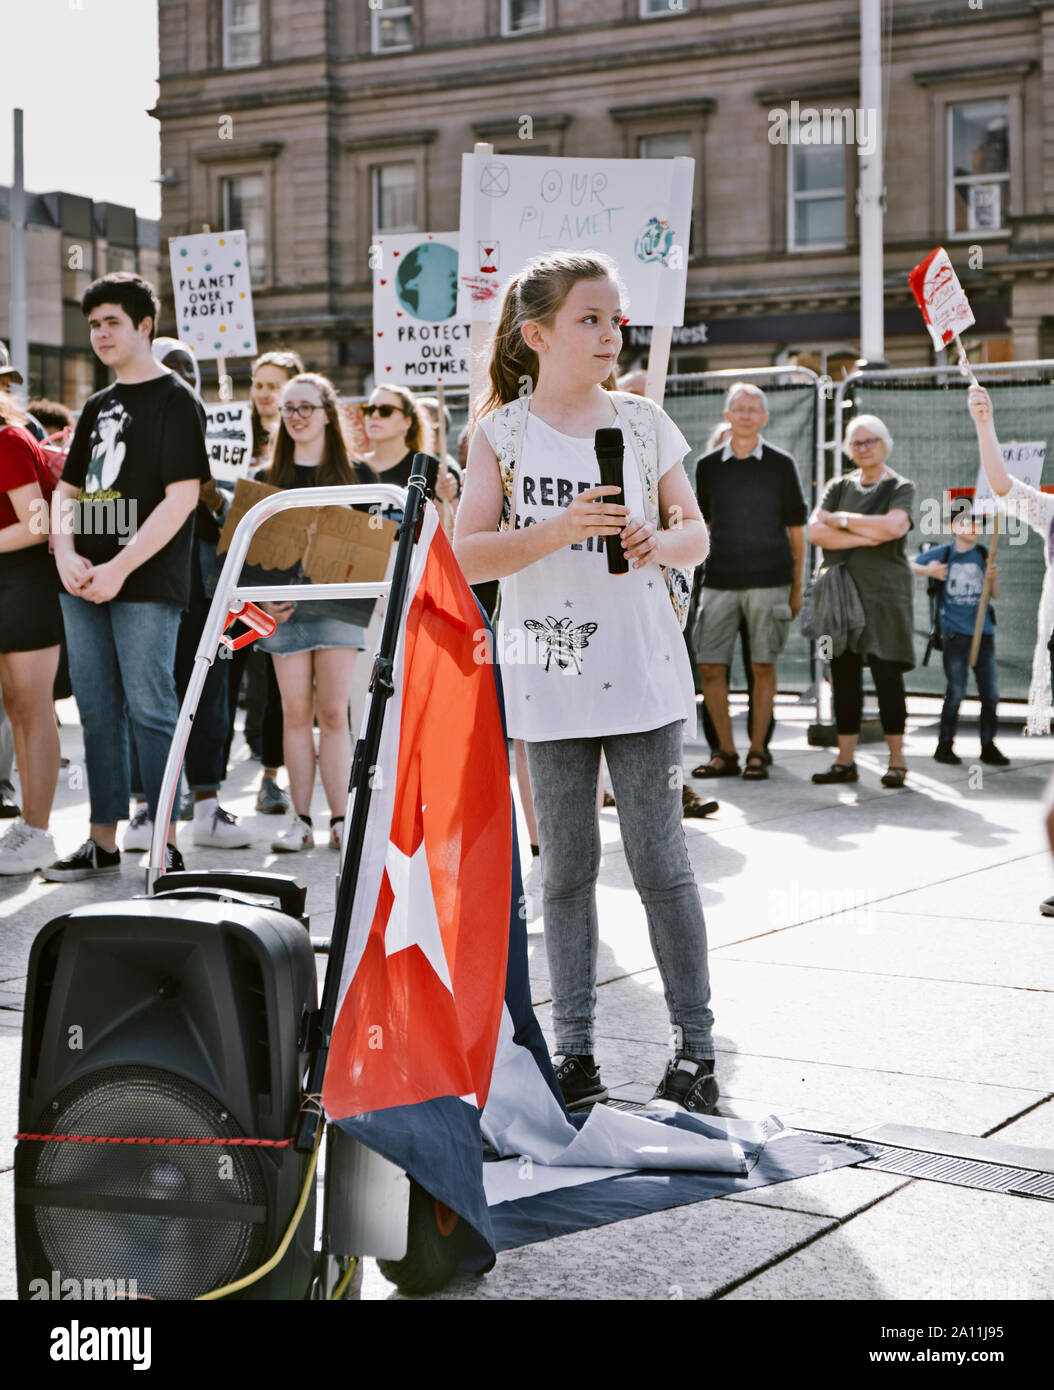 Schoolgirl activist next to Cuban flag speaking at the 20th September 2019 Global climate strike, Old Market Square, Nottingham, England Stock Photo